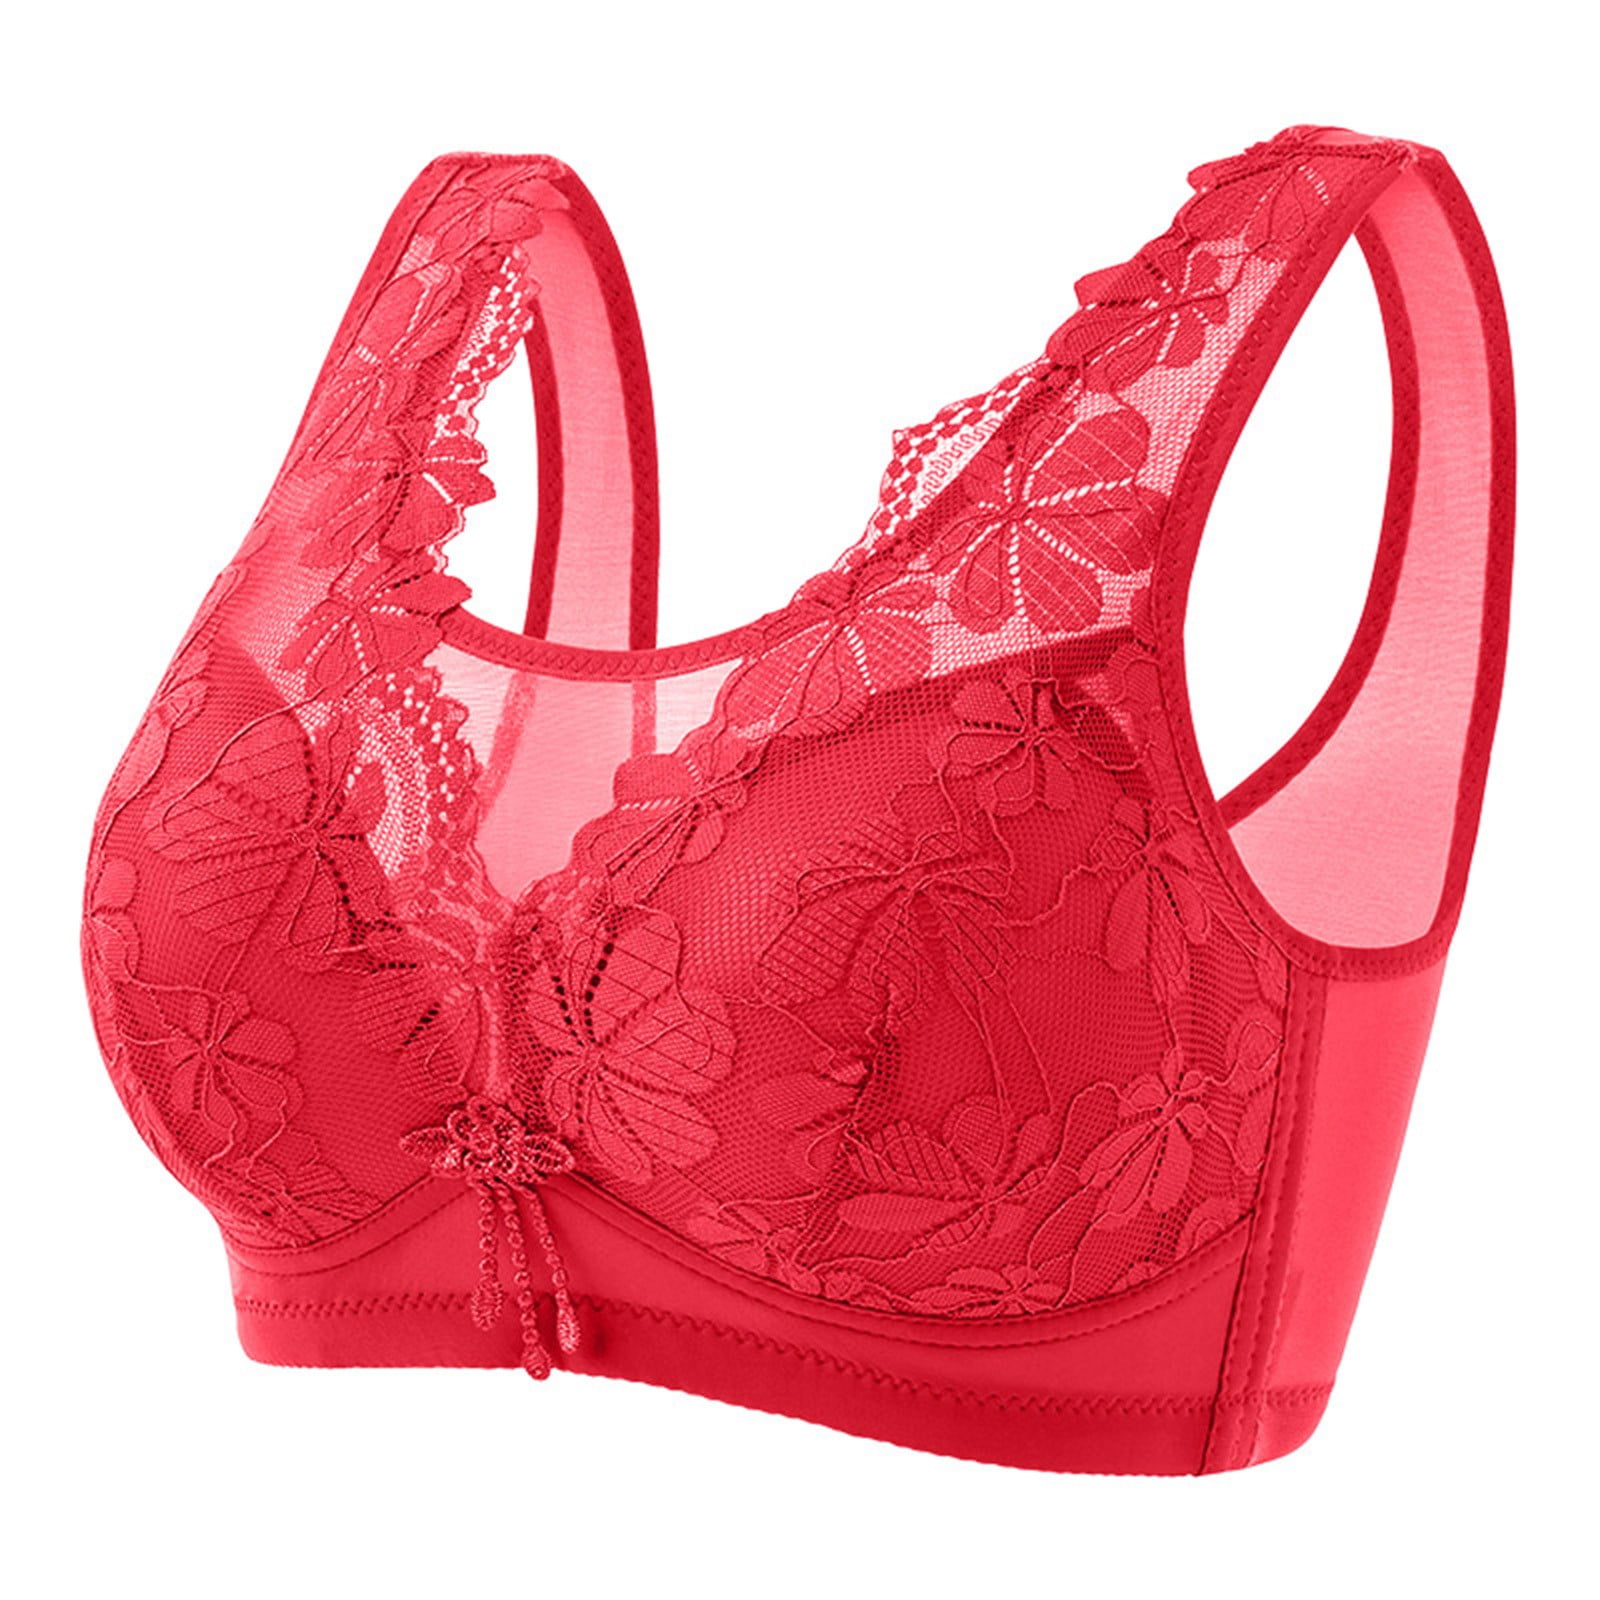 safuny Everyday Bra for Women Seamless Smoothing Gathering Detachable  Shoulder Straps For Use Wireless Holiday Push Up Ultra Light Lingerie  Brassiere